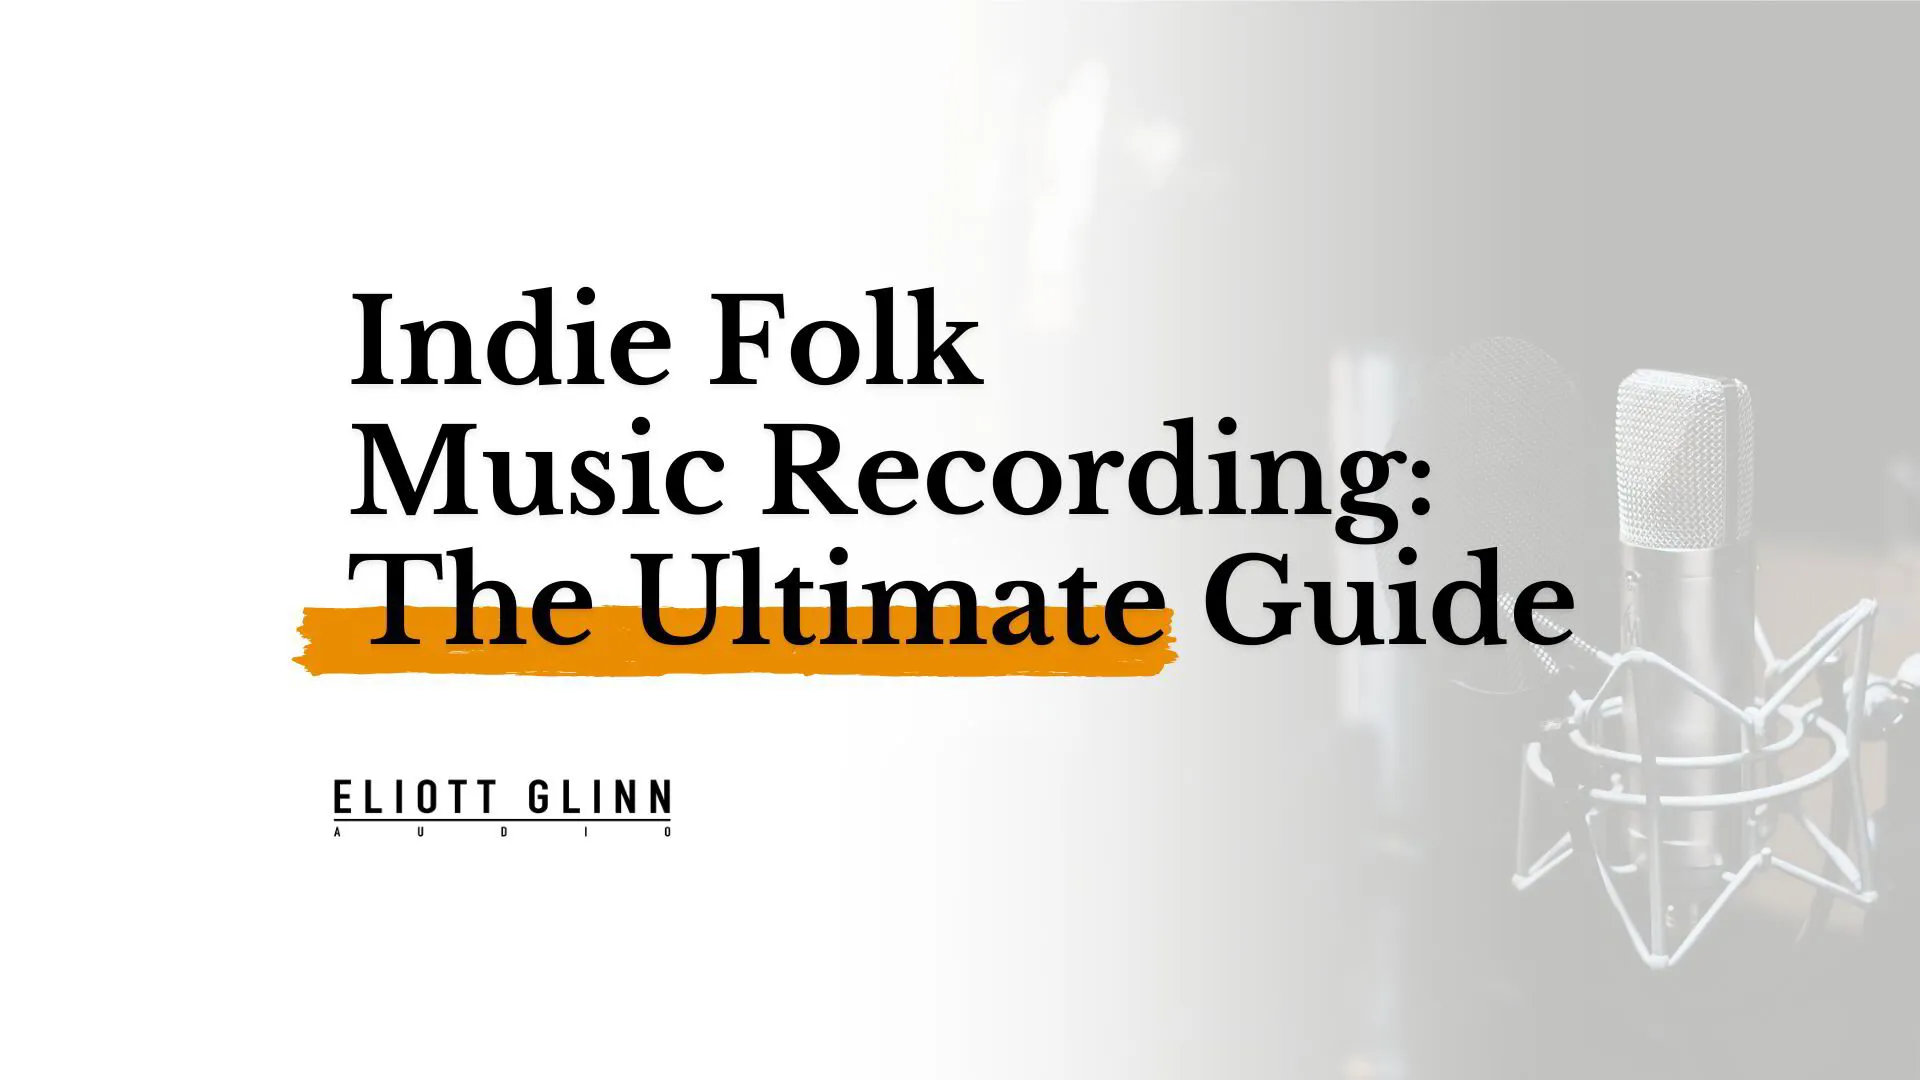 Indie Folk Music Recording: The Ultimate Guide